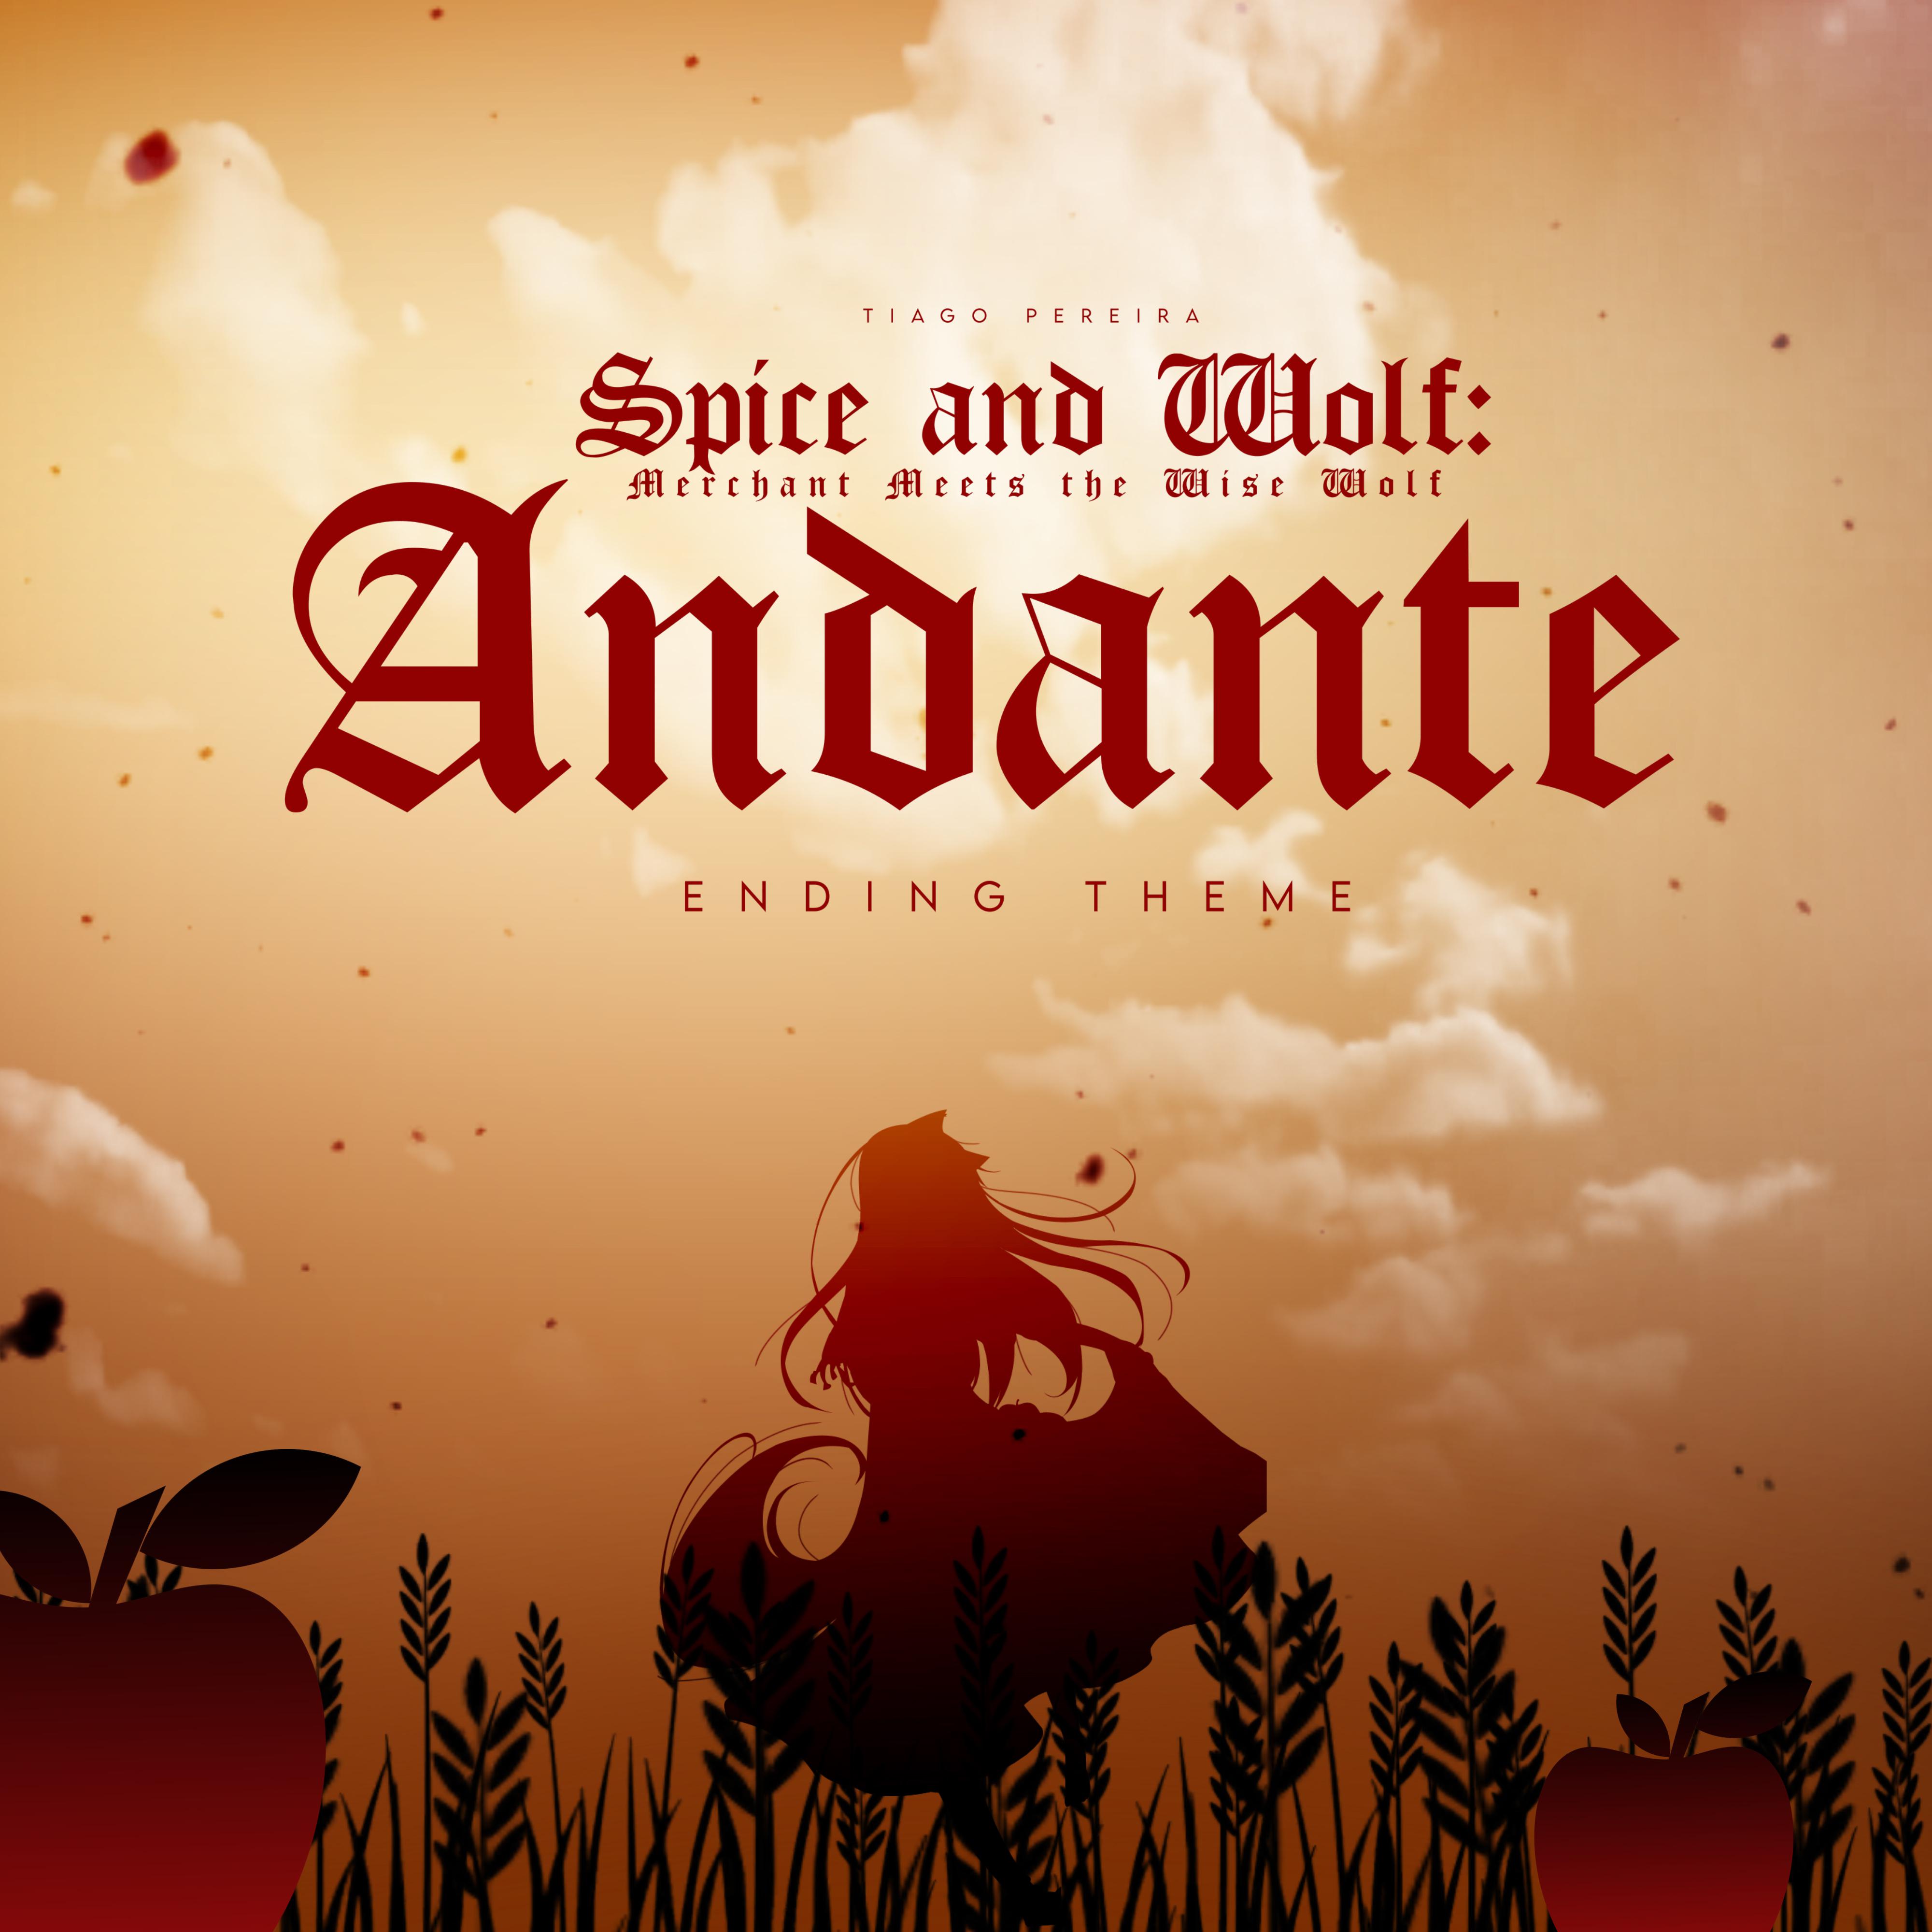 Постер альбома Andante (Spice and Wolf: Merchant Meets Wise Wolf Ending Theme)